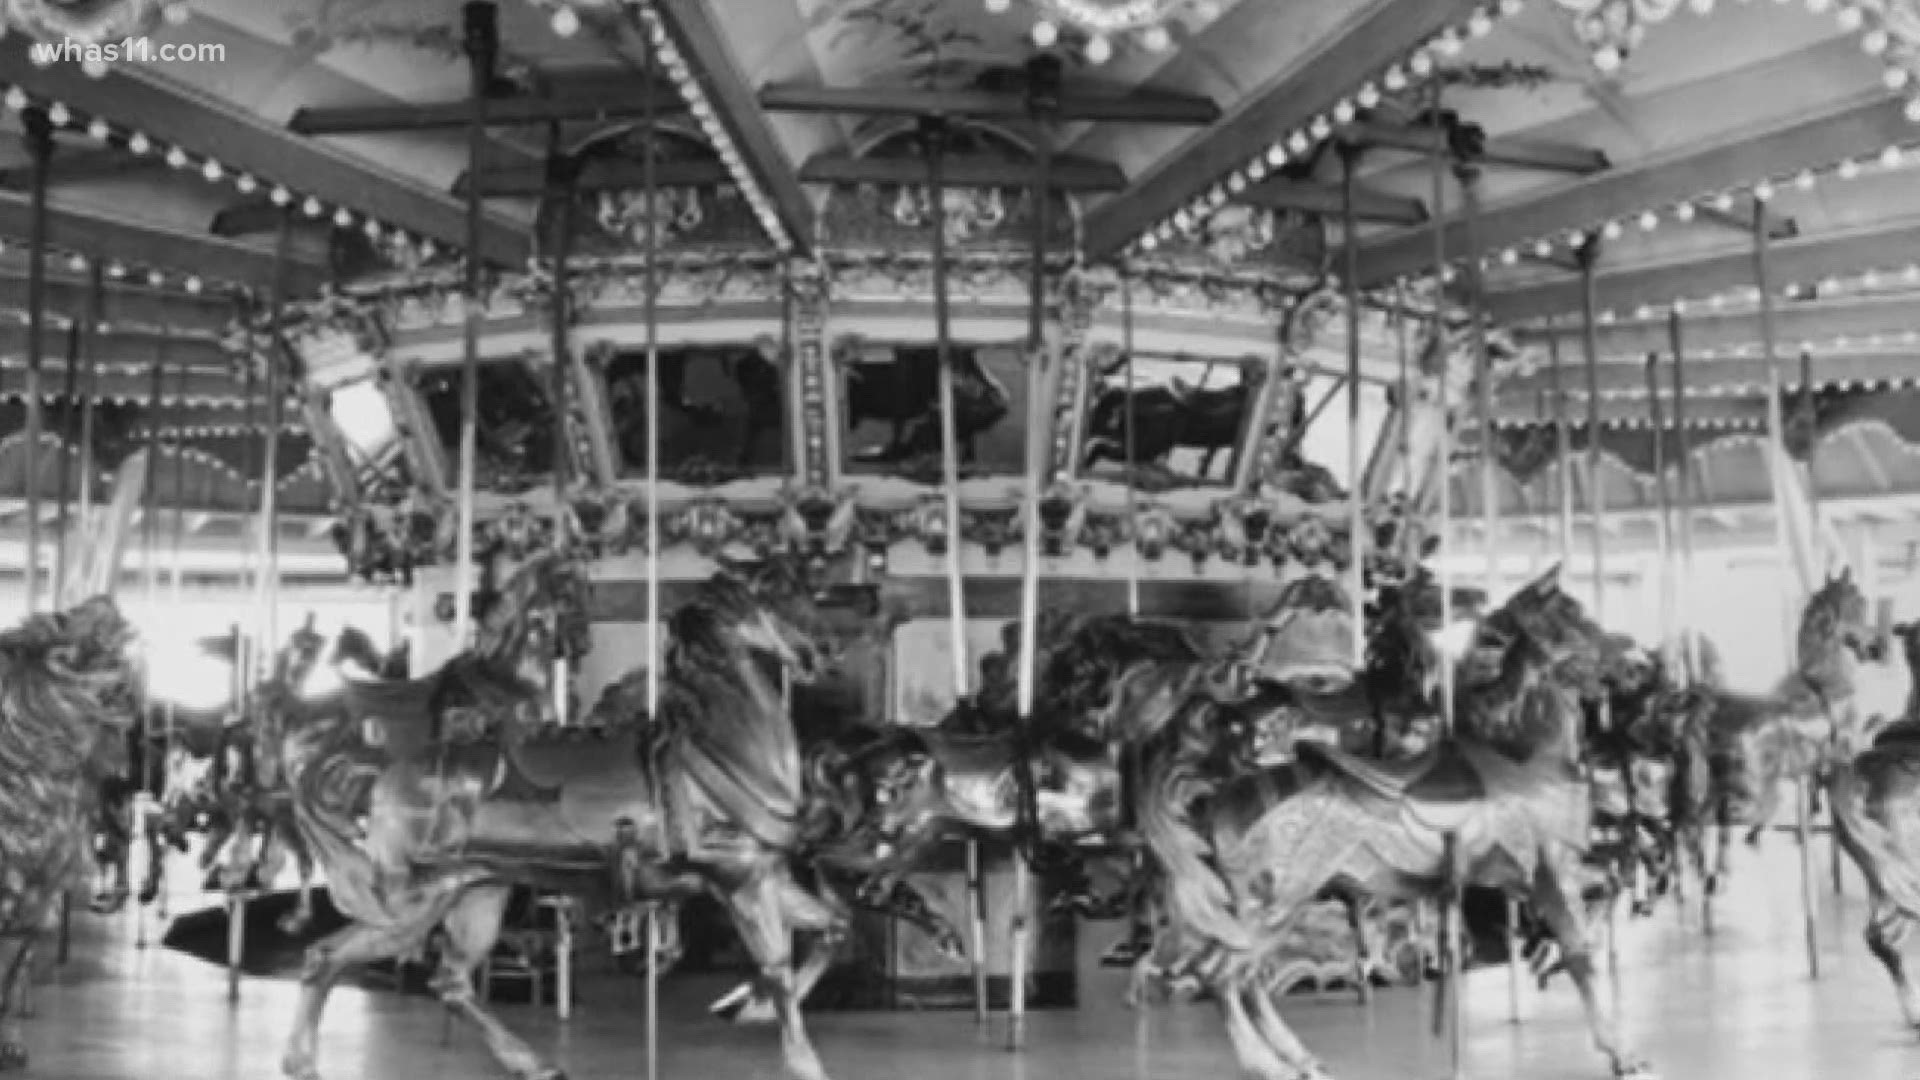 After the Fontaine Ferry's longtime run ended during racial unrest, the Portland Museum has located its popular carousel.